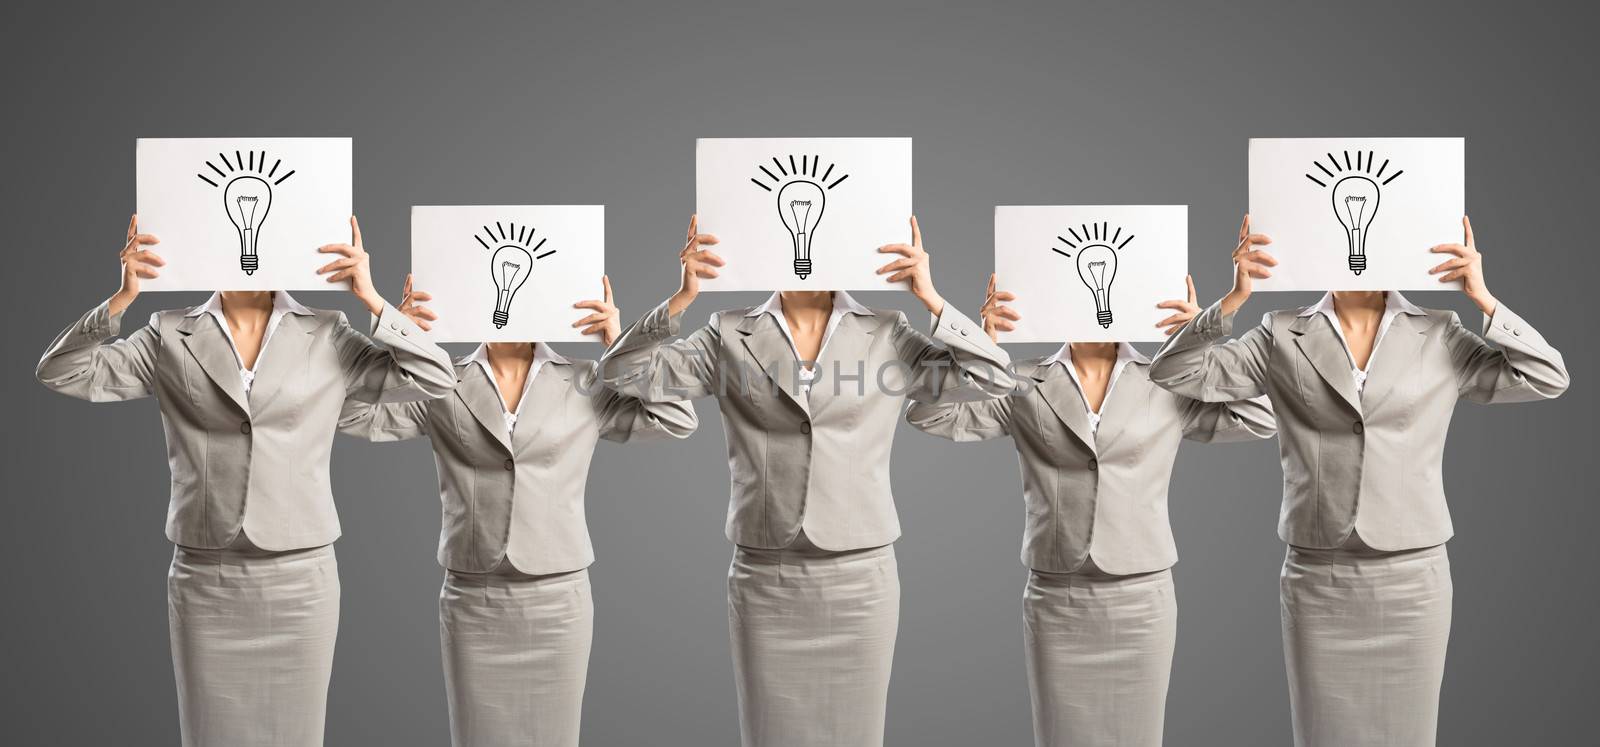 image of a businesswomen standing in a row, concept of teamwork